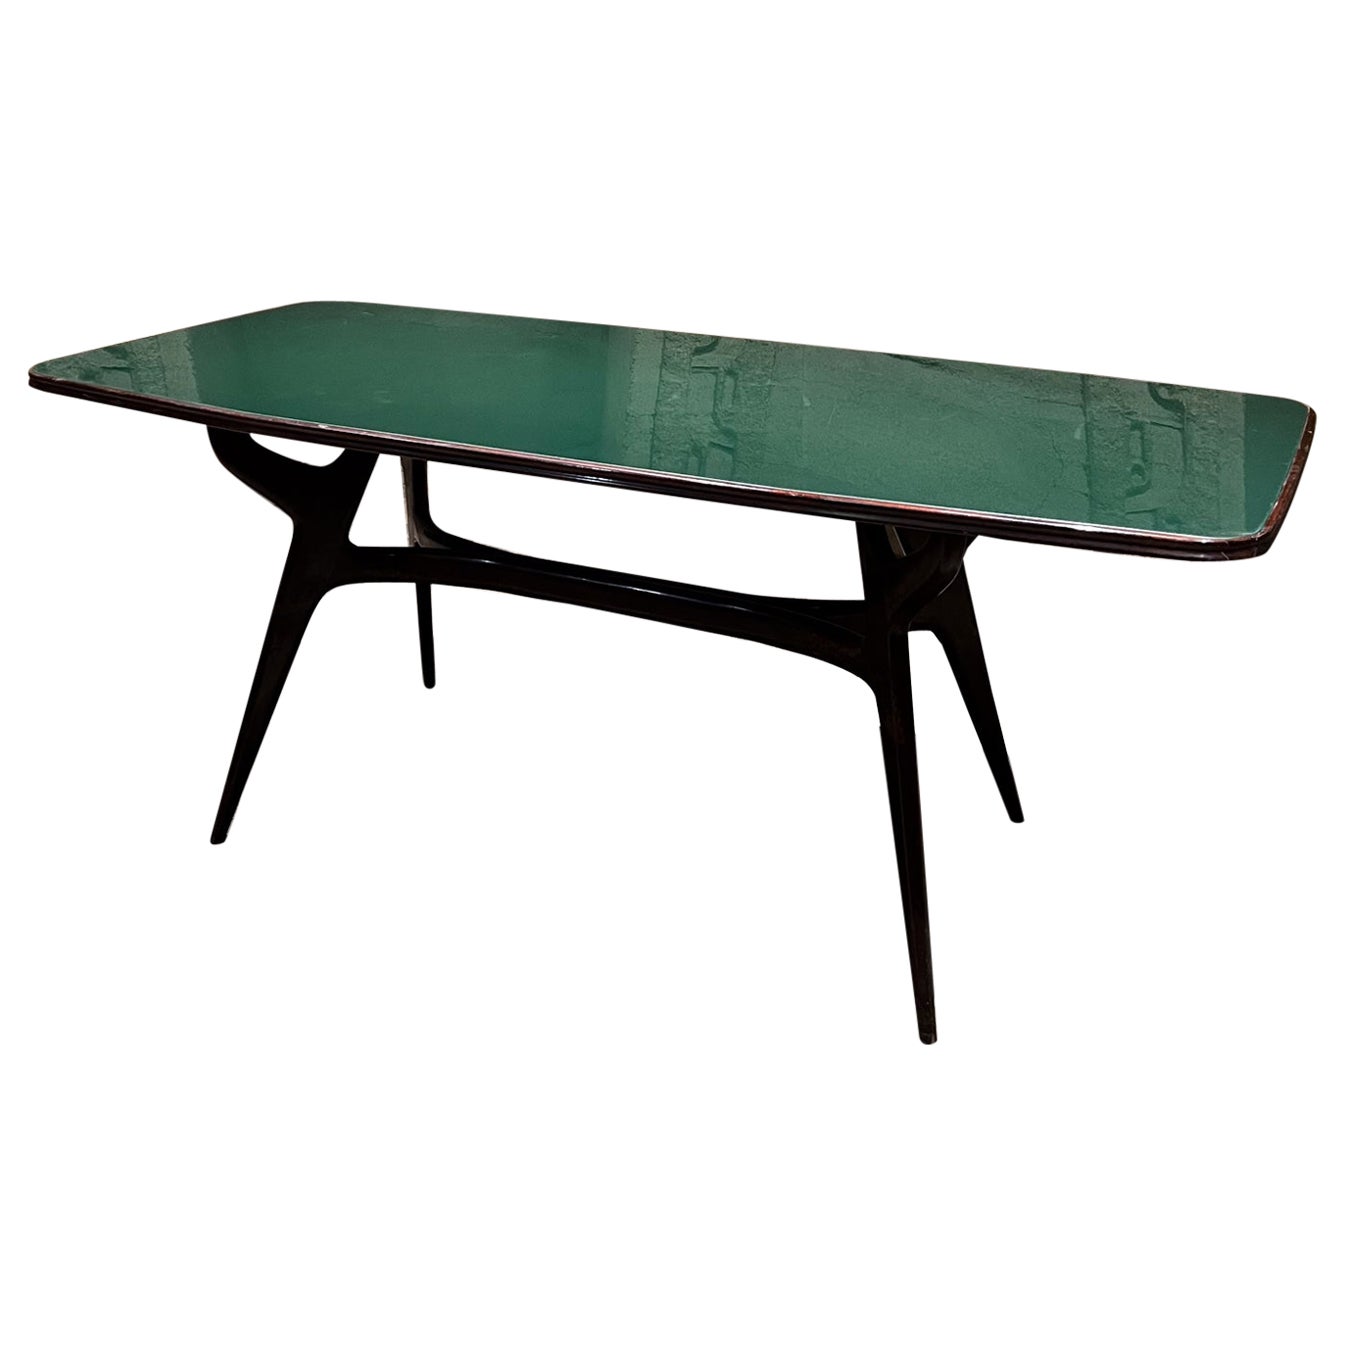 1950s Modernist Green Dining Table after Ico Parisi Italy